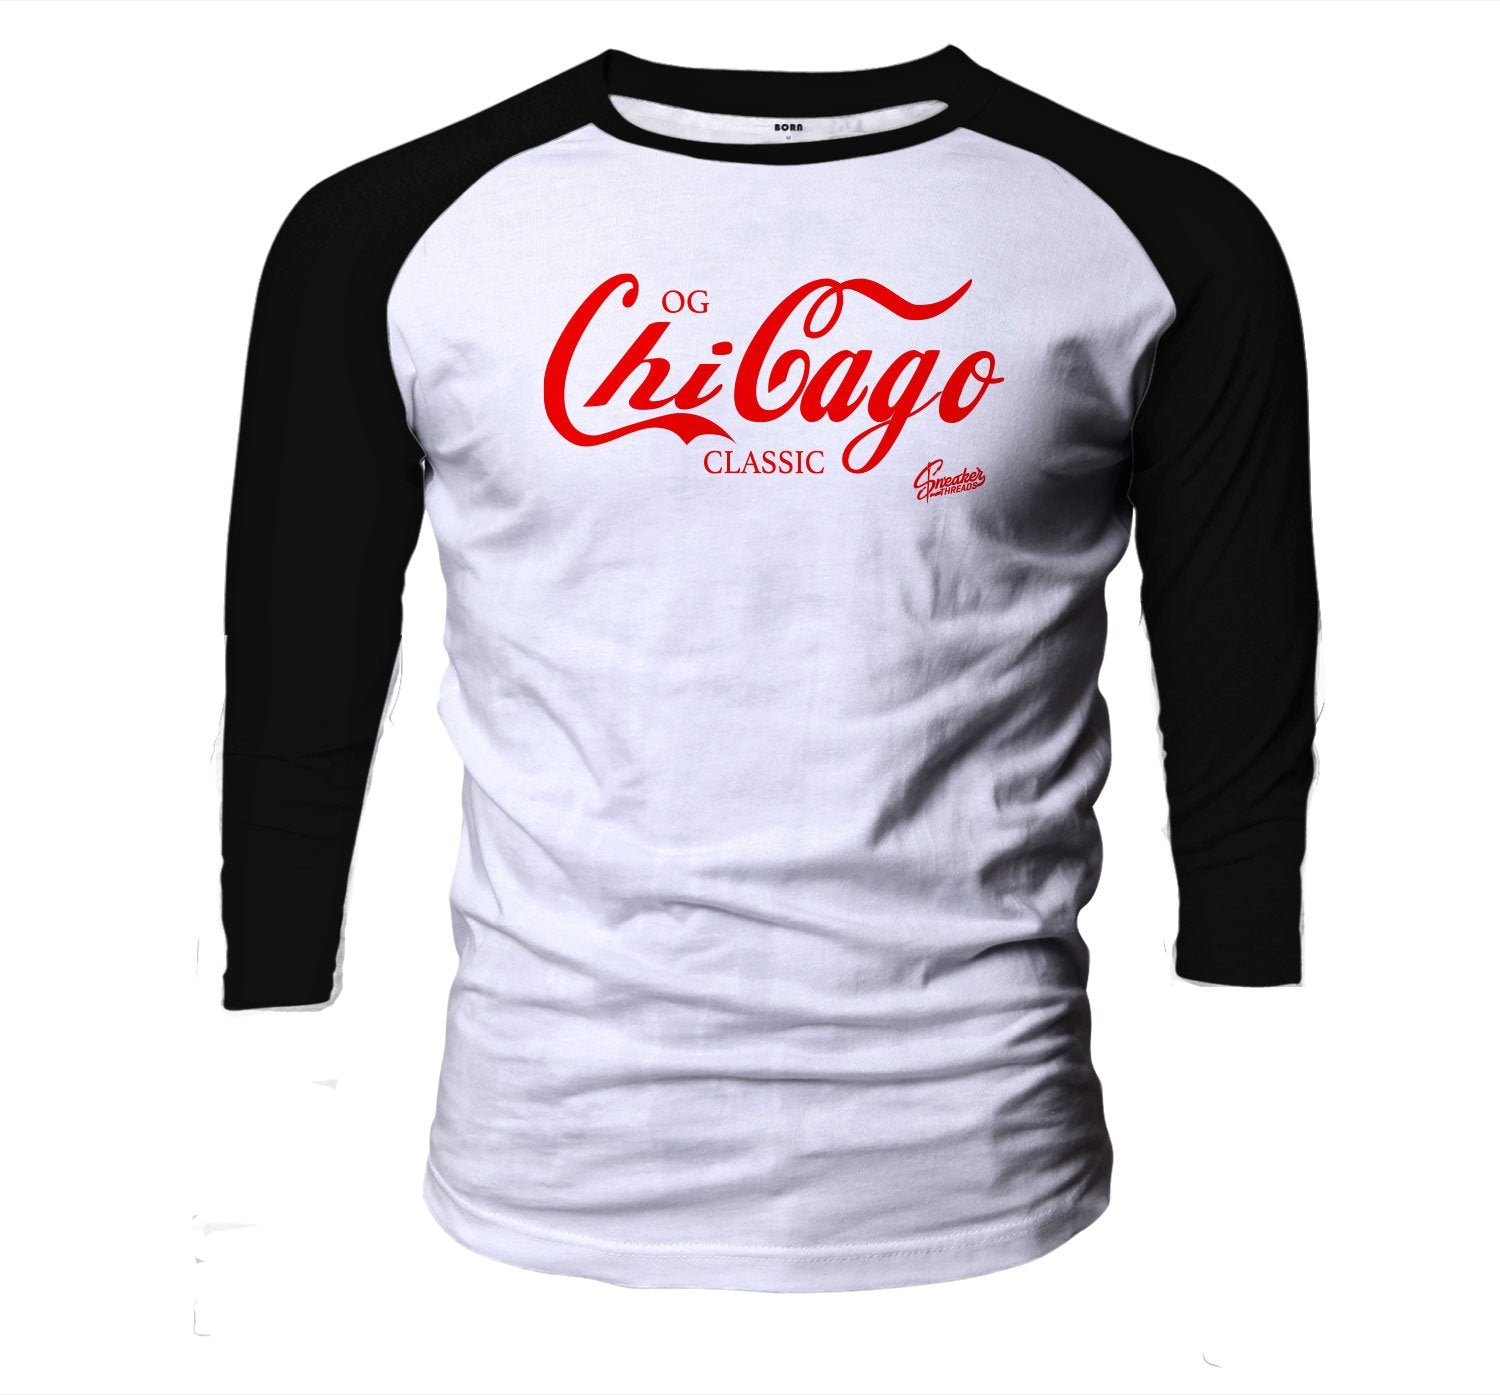 Raglan shirt collection for men designed to match the Jordan 3 red cement sneaker collection